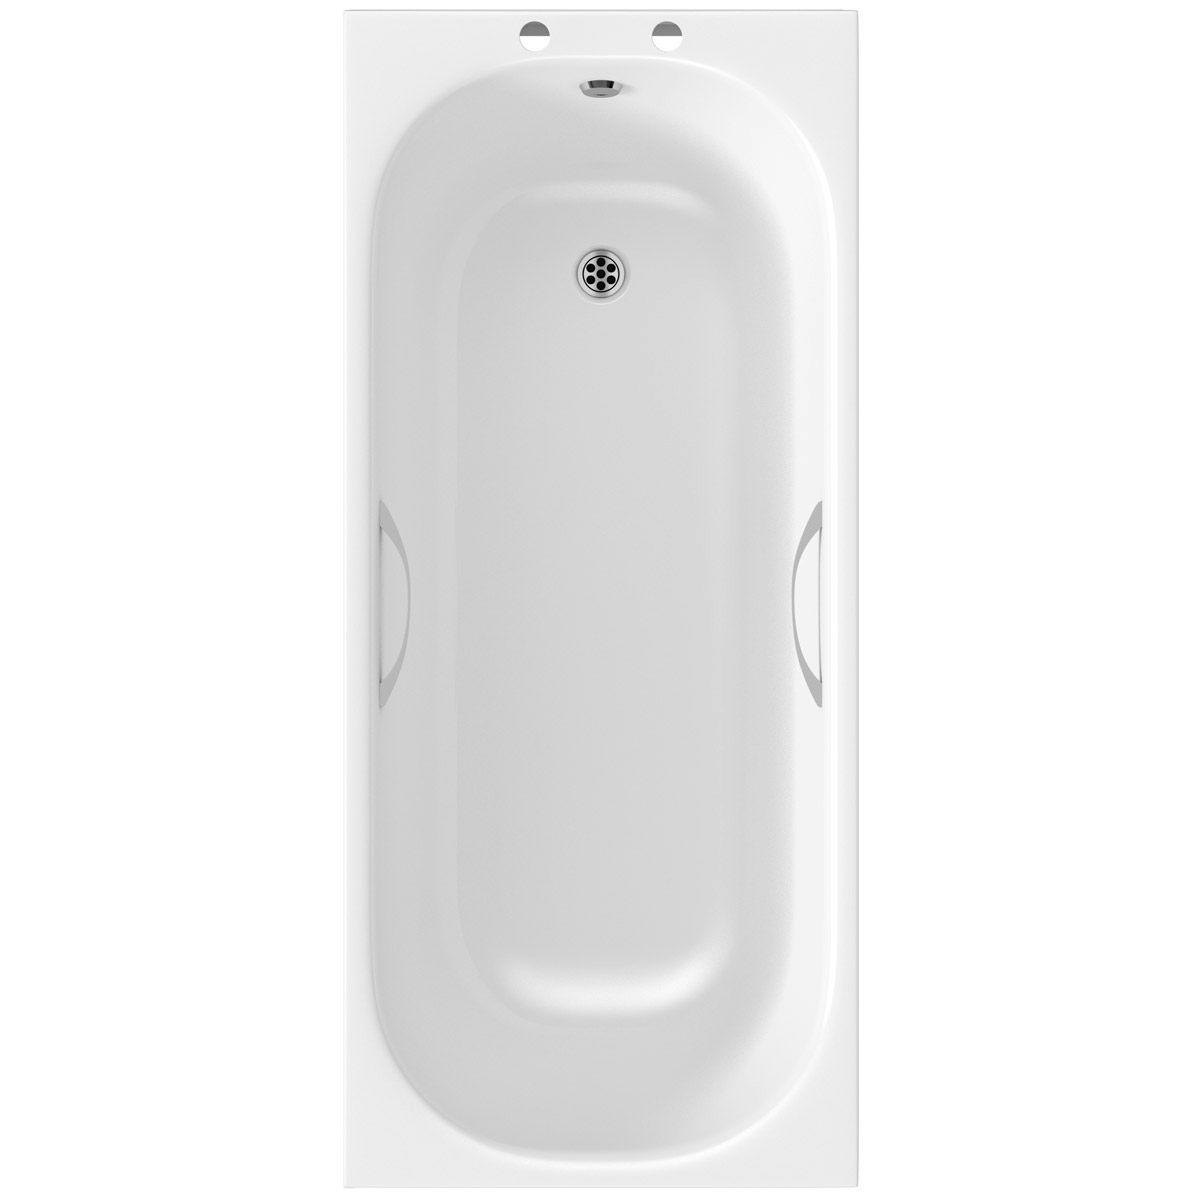 Orchard single ended steel bath with handle grips 1600 x 700